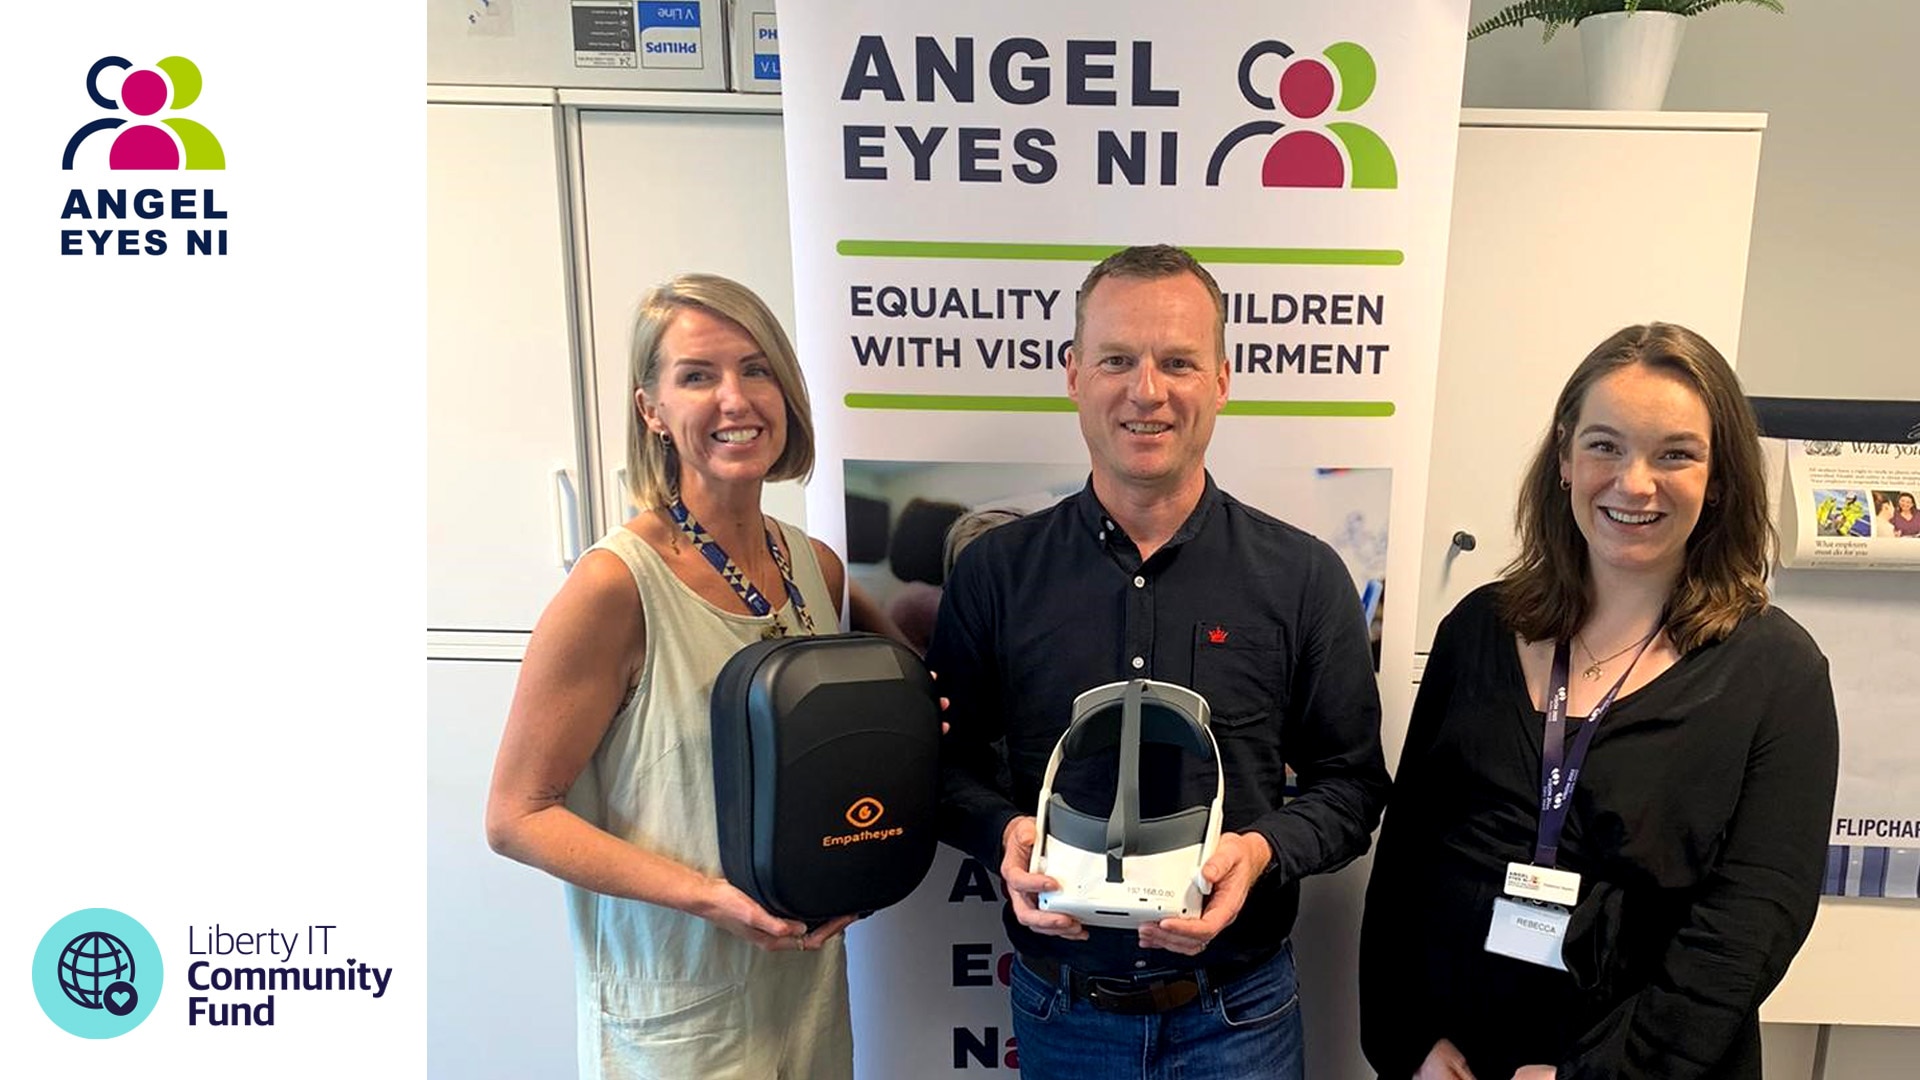 Photo of Angel Eyes and Liberty IT employees holding VR headsets